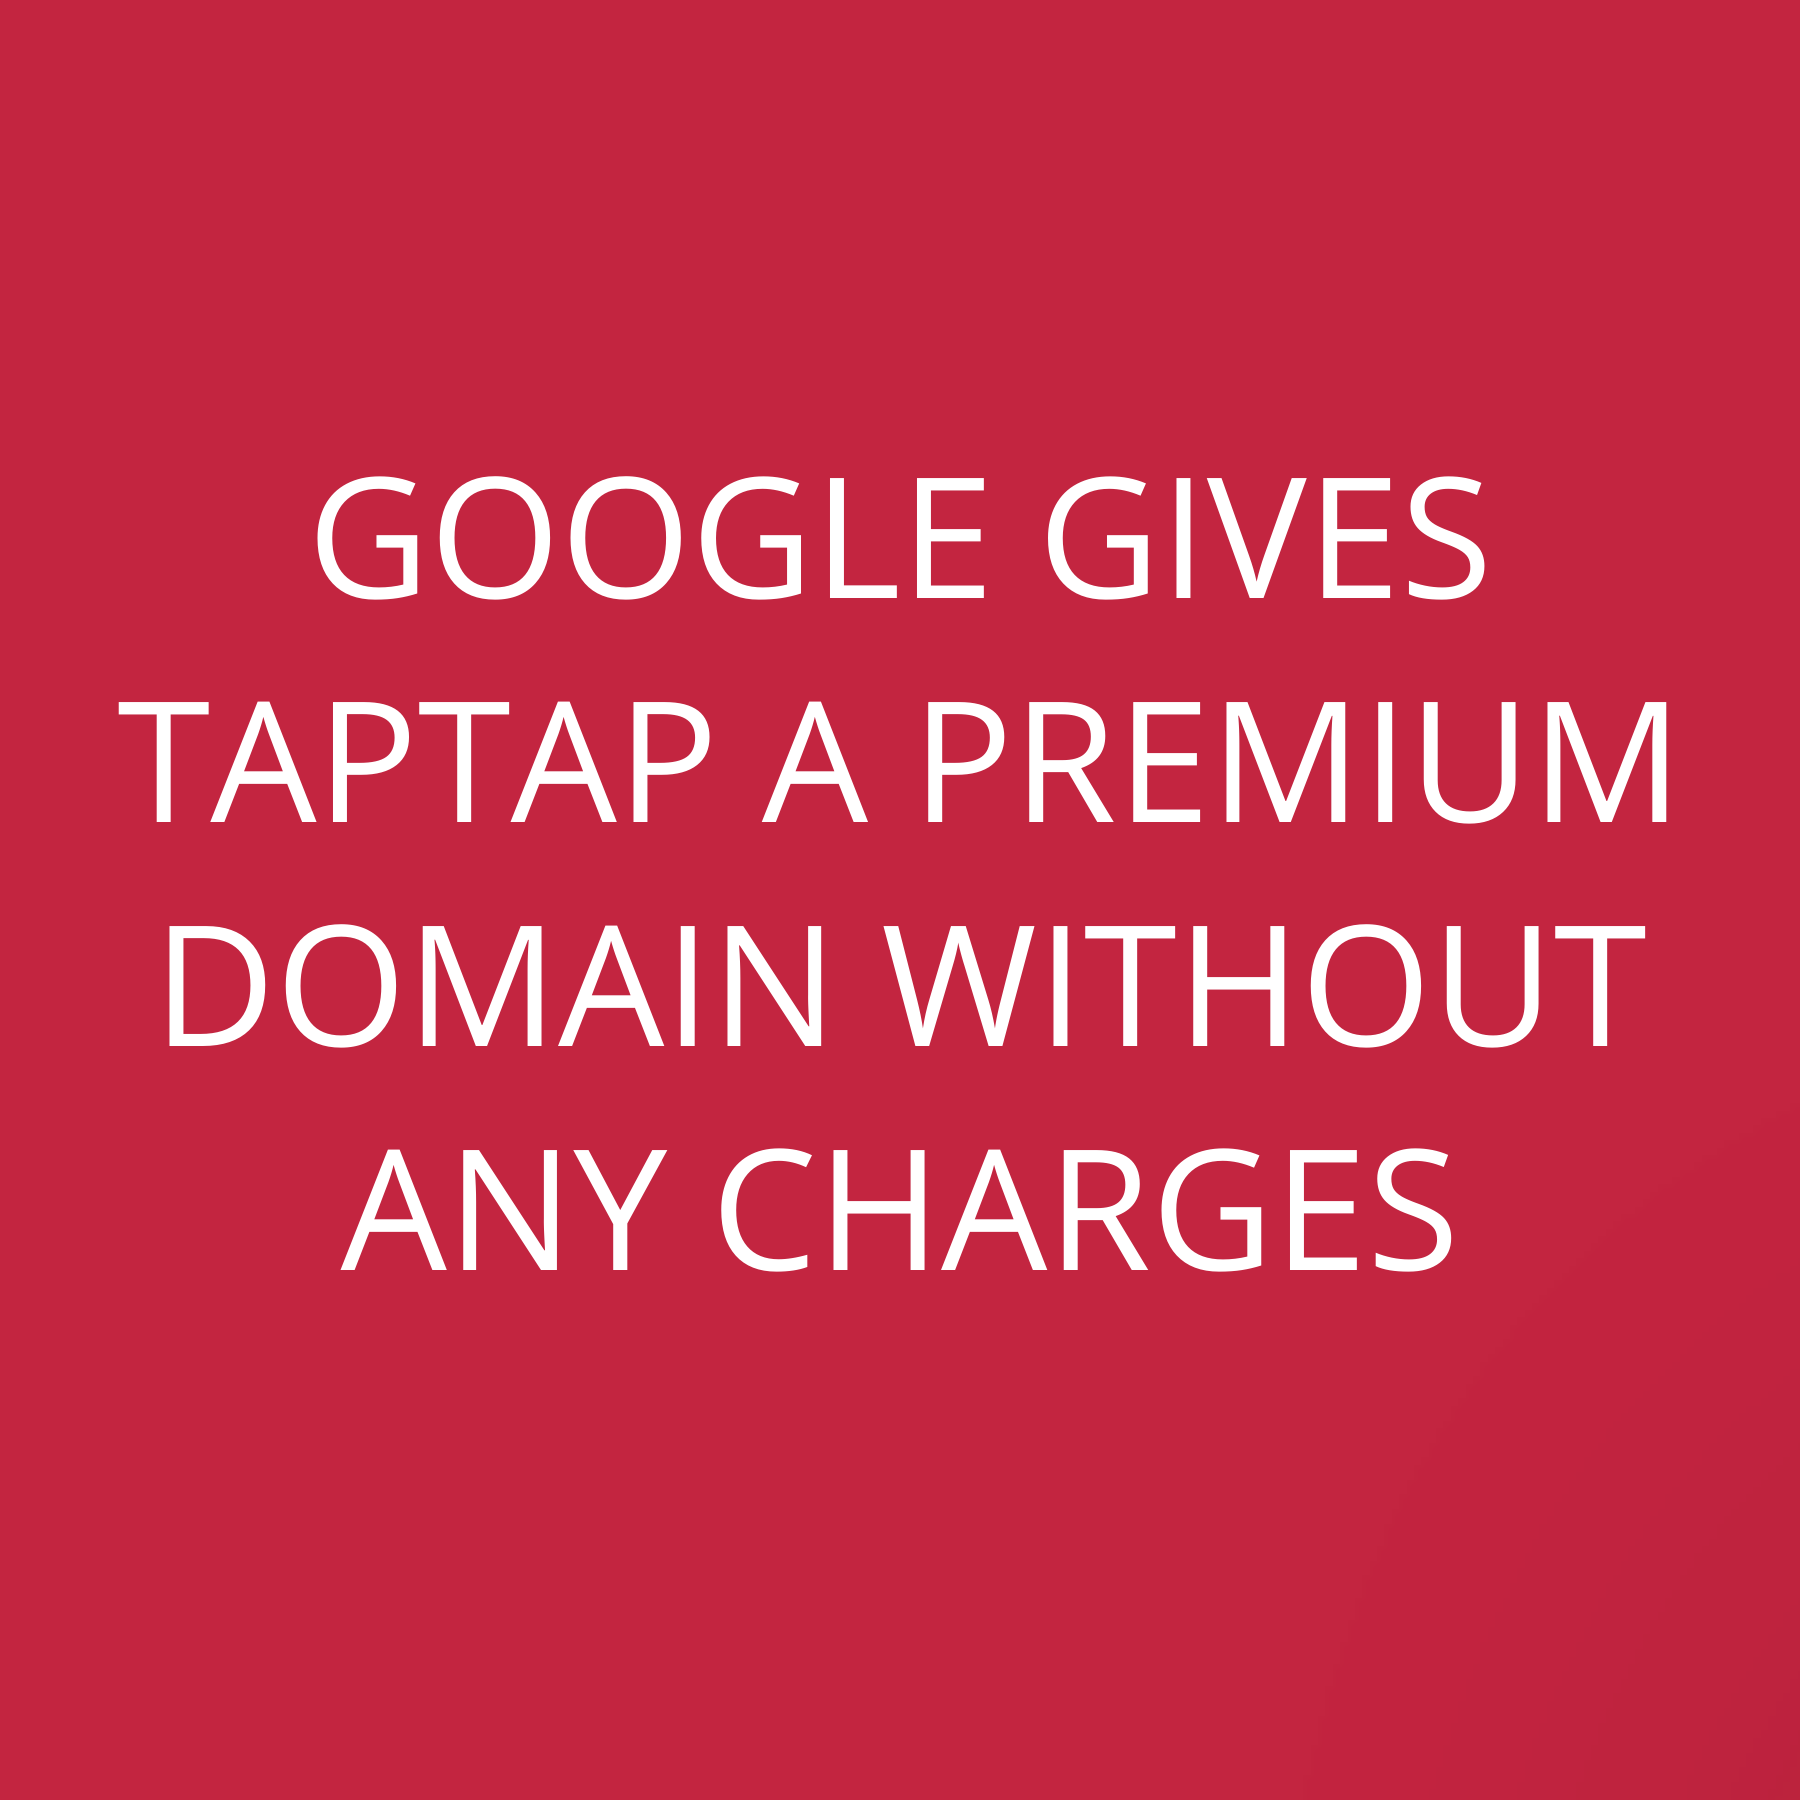 Google gives TapTap a premium domain without any charges